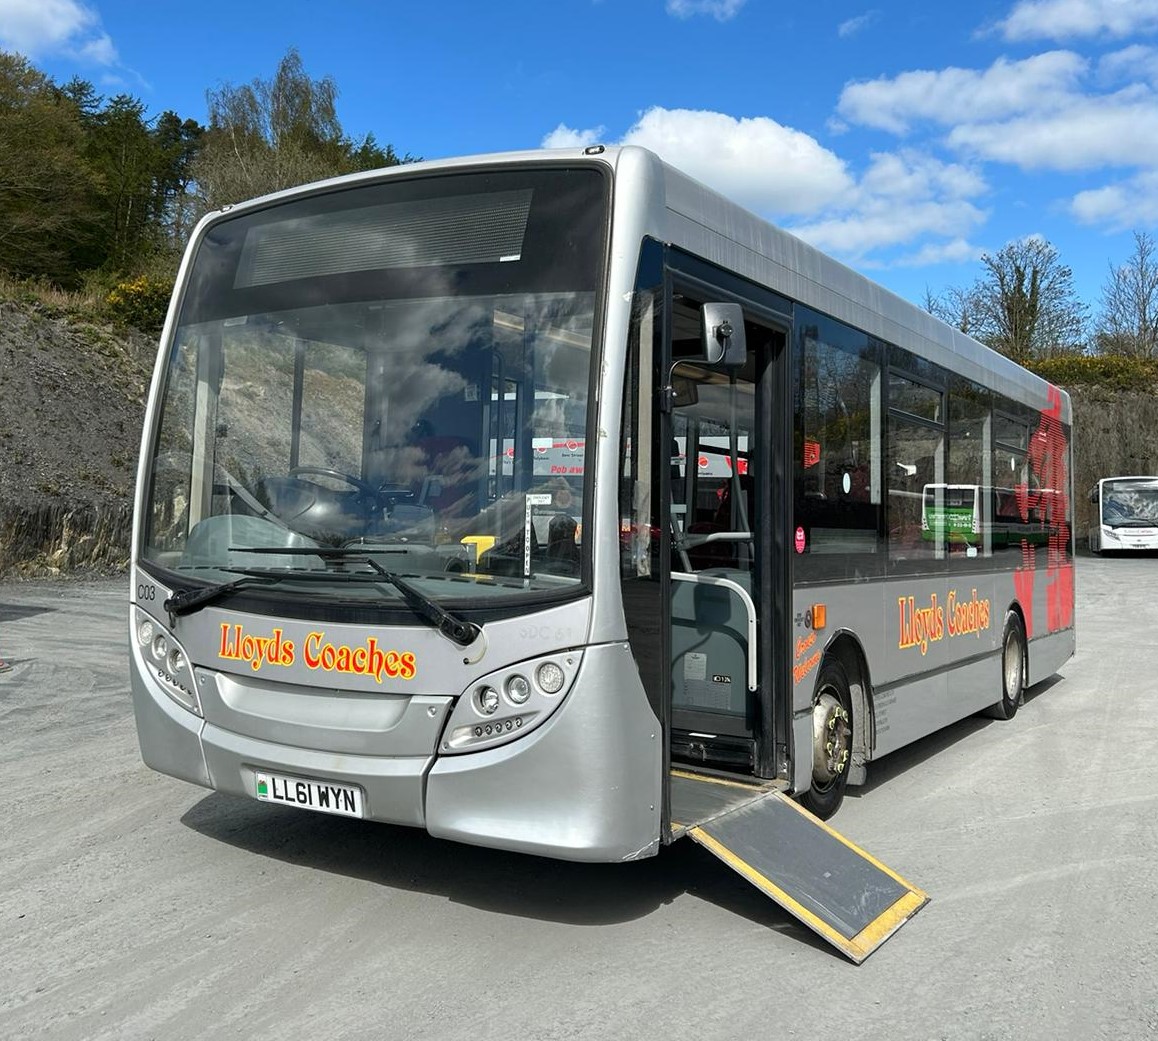 ADL Enviro 200 with seat belts